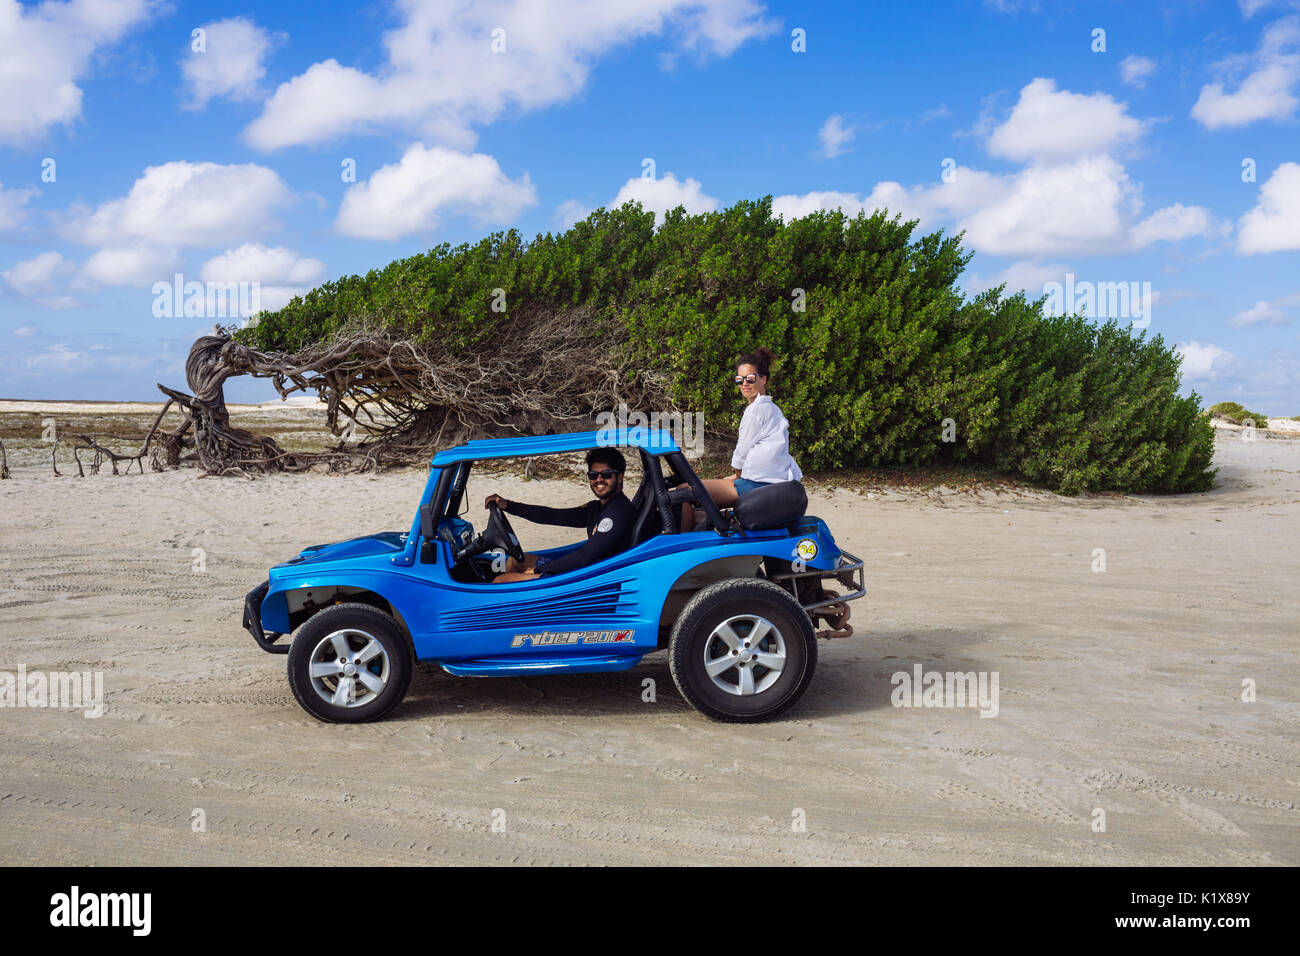 A Buggie Driver Posing With A Female Tourist Near The Lazy Tree Stock Photo Alamy